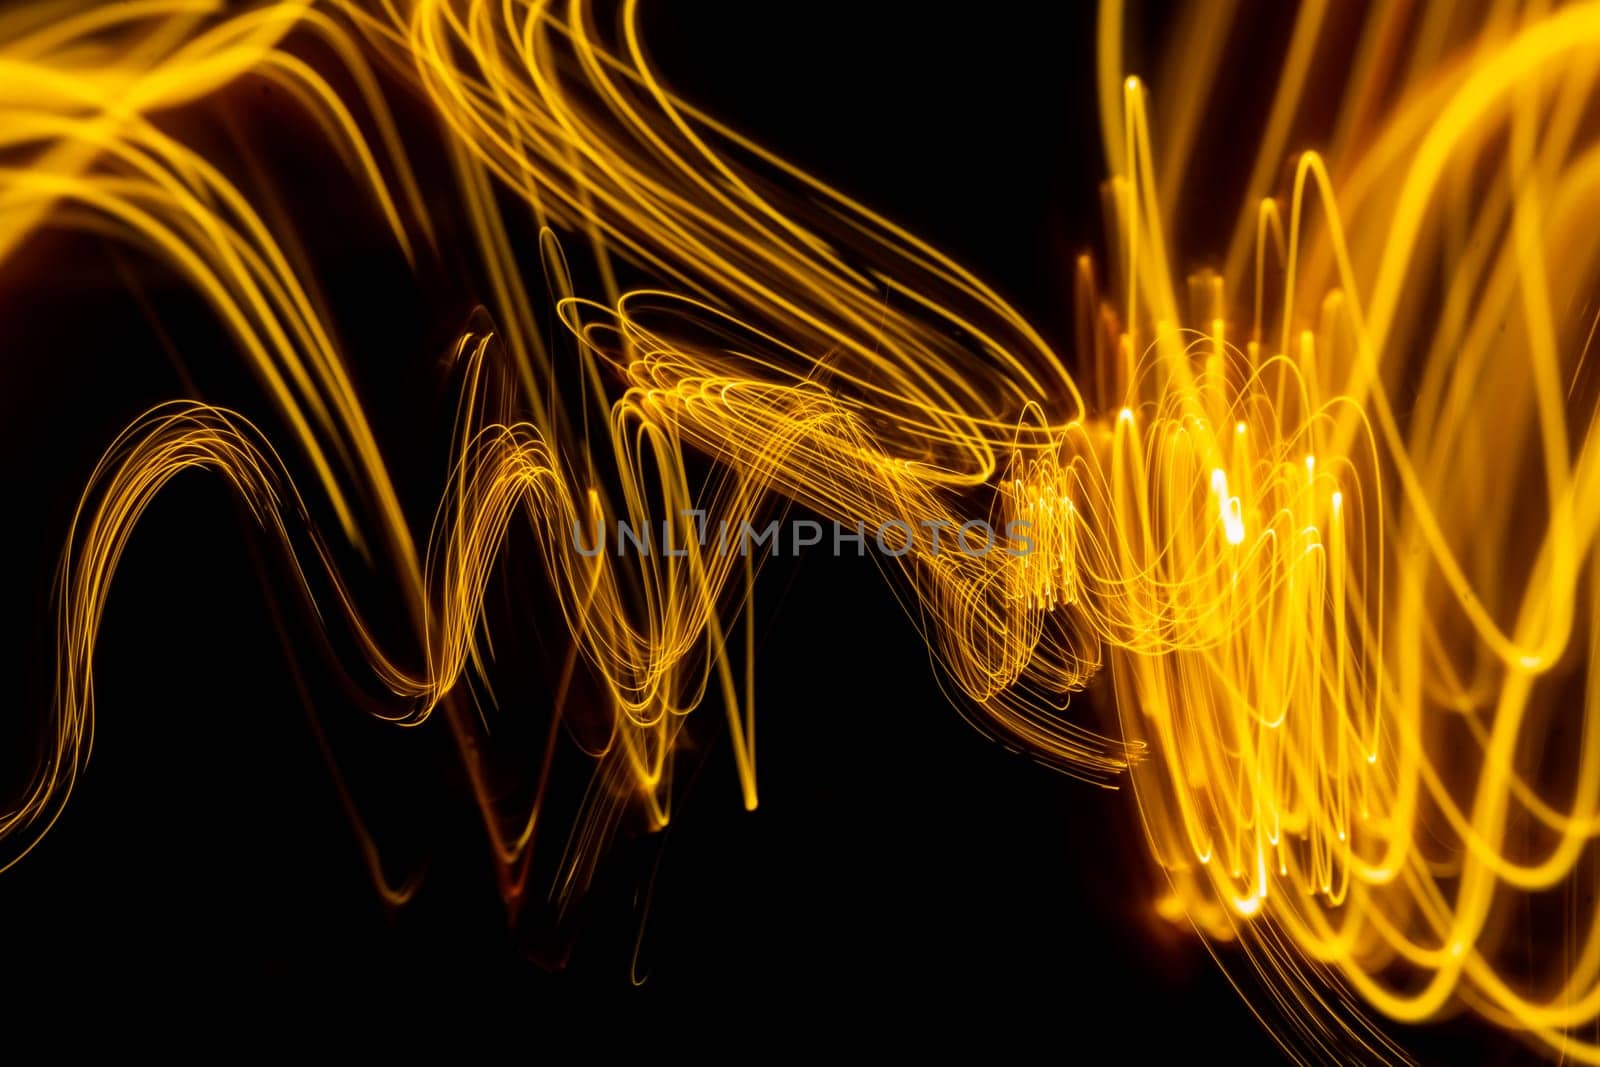 Futuristic light wave of energy with elegant glowing lines. Abstract technology background. High quality photo